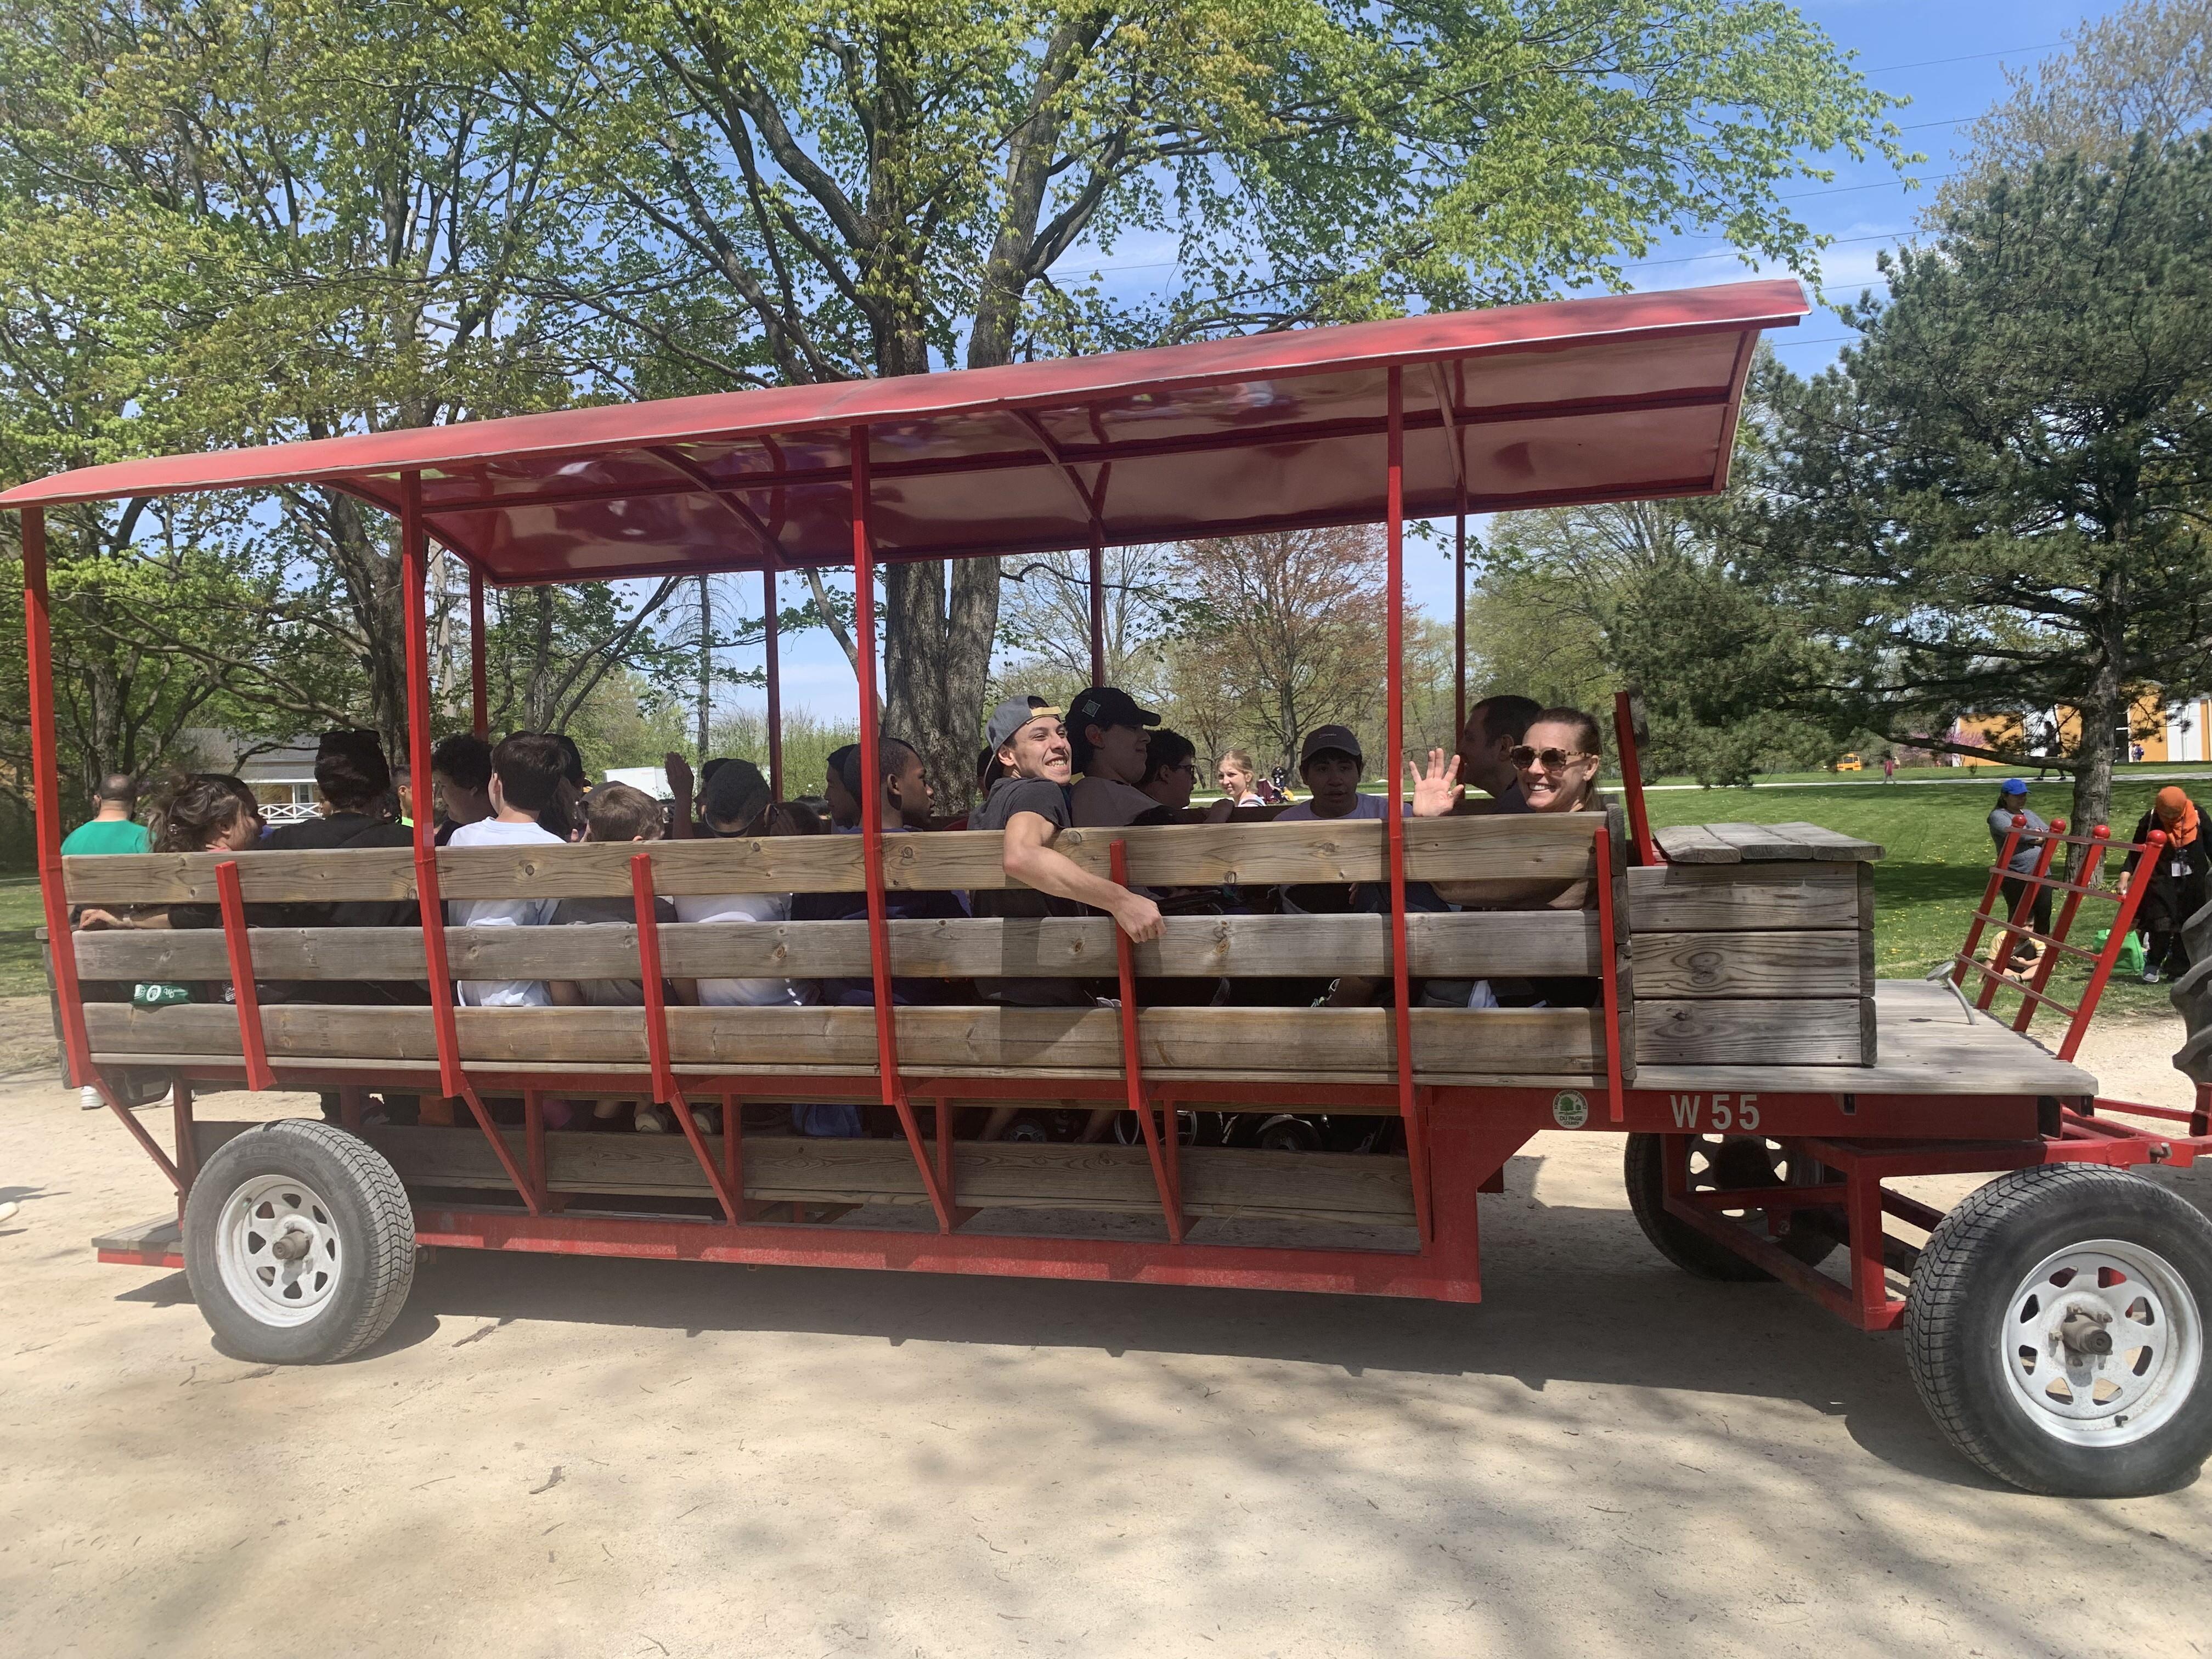 Students on a wagon